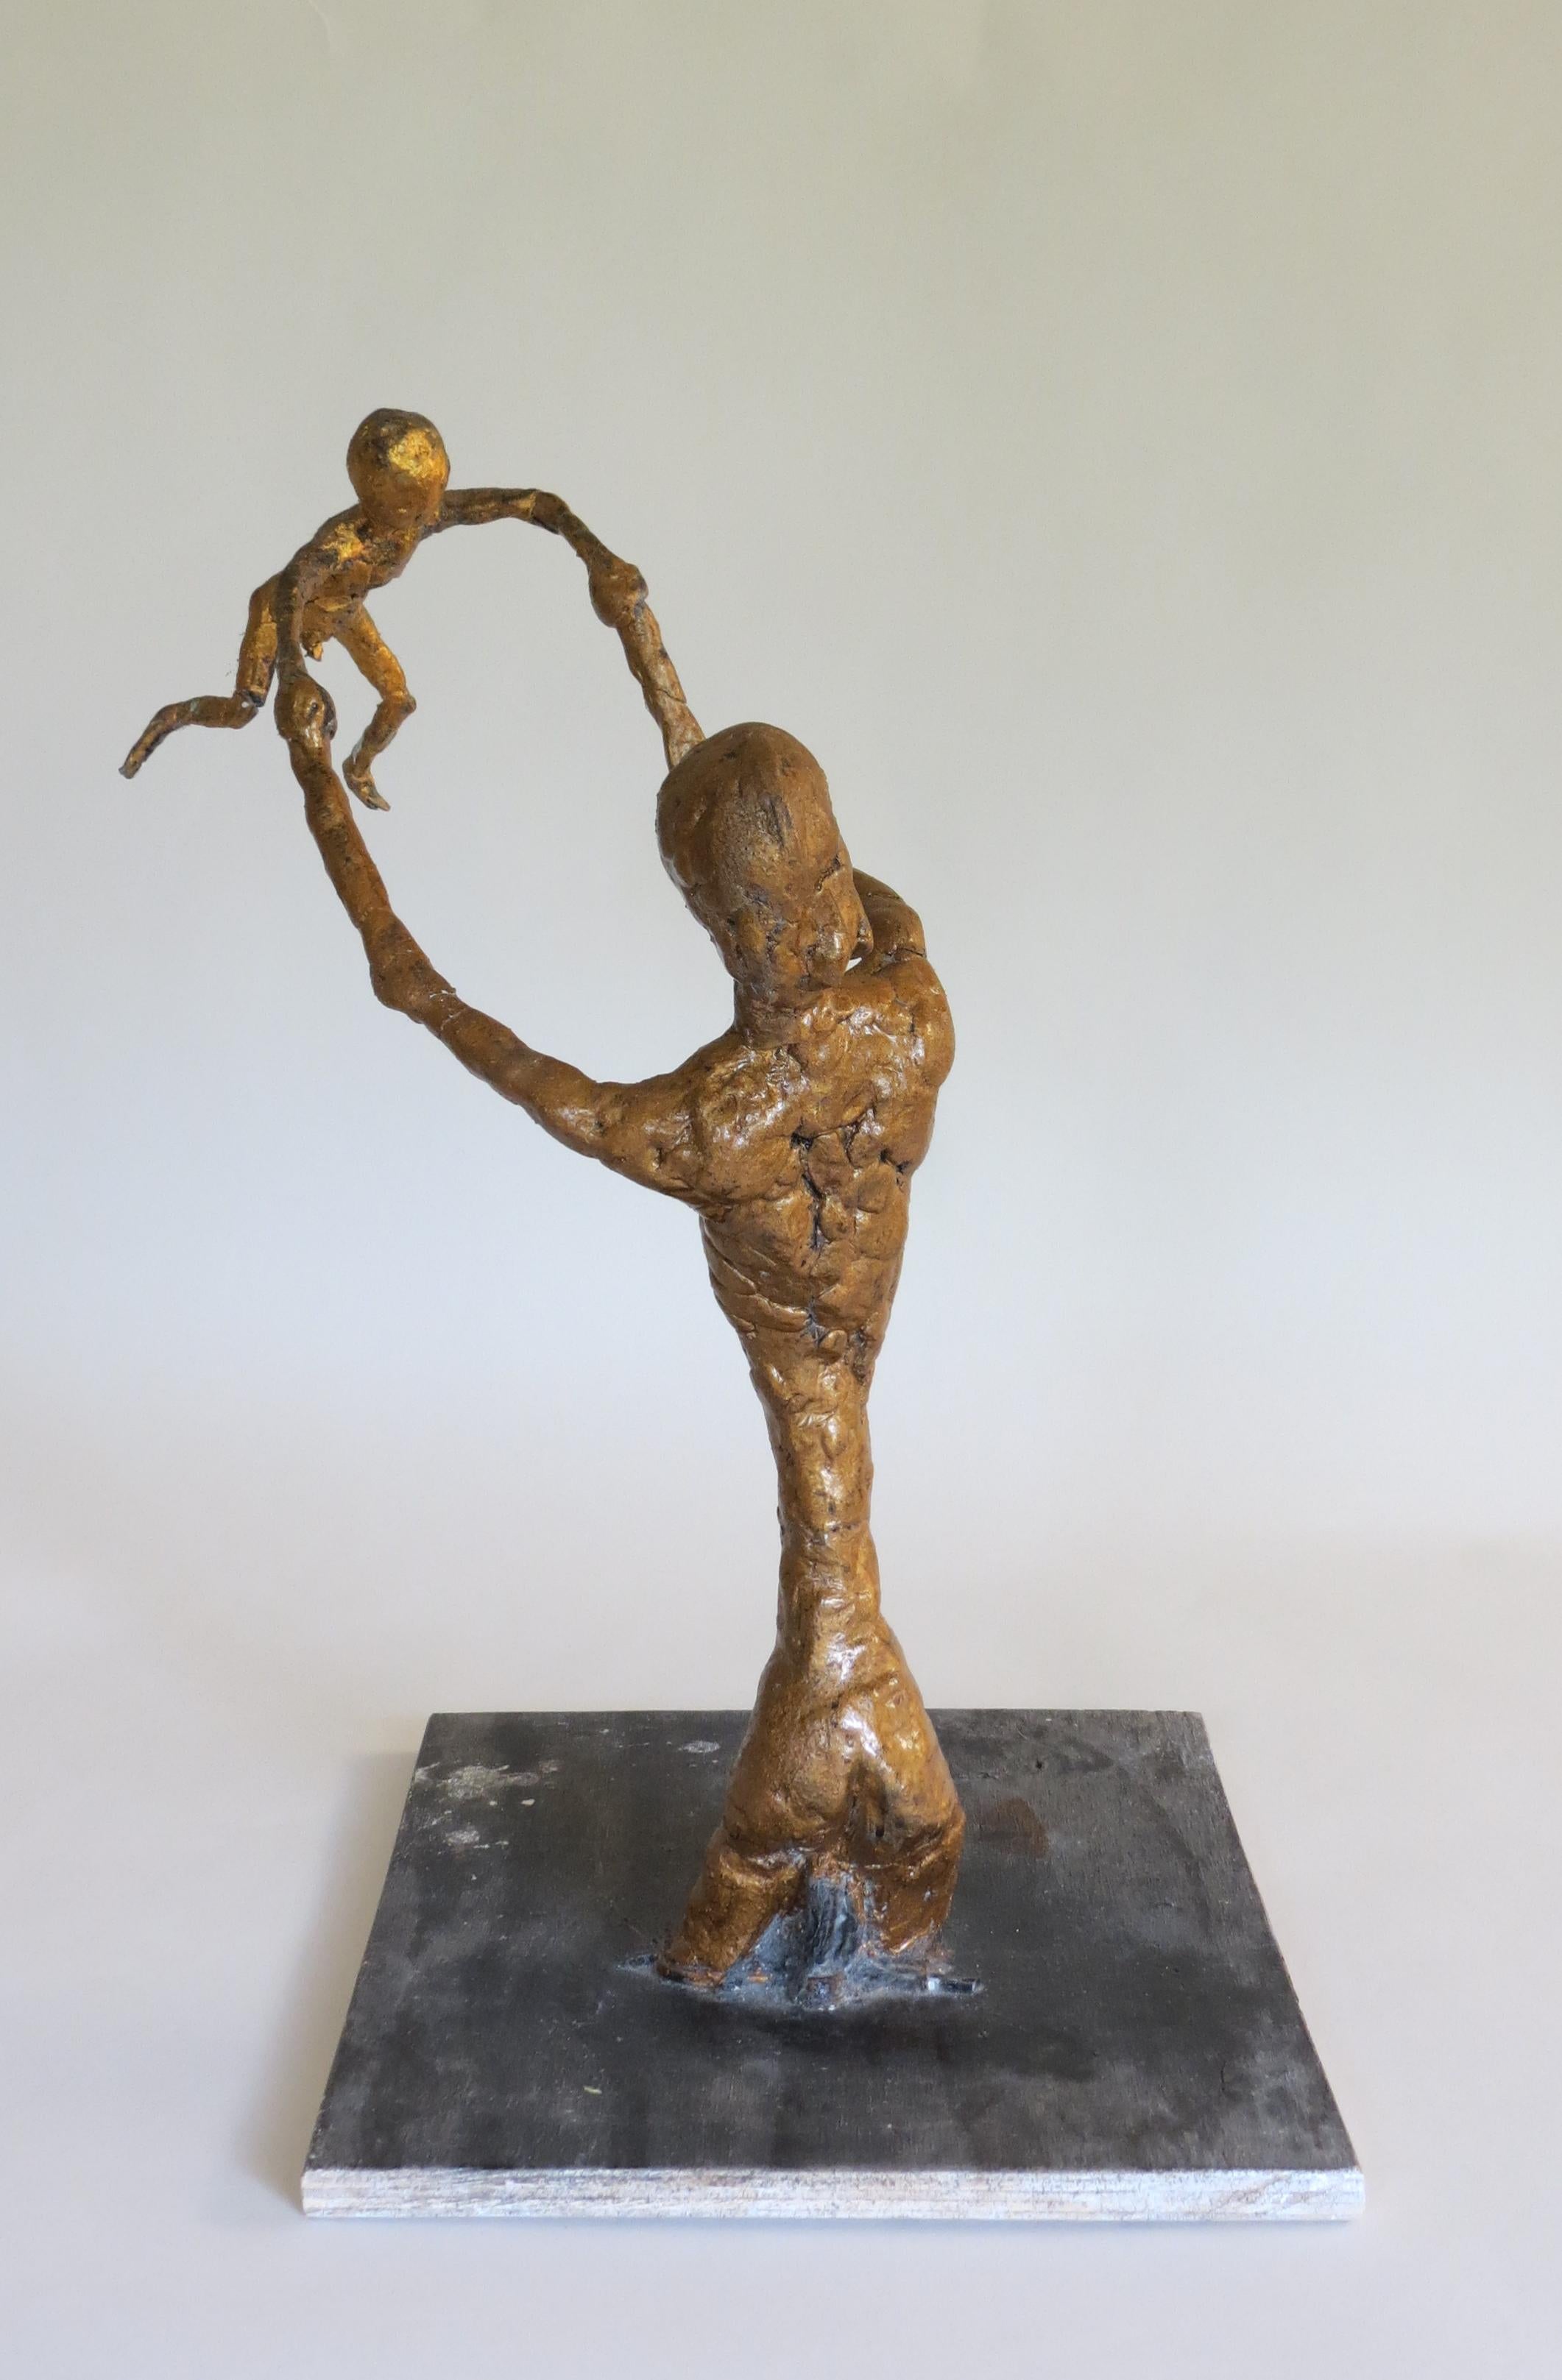 Hand-Crafted Plaster Maquette Sculpture of Mother and Child by Bill Young